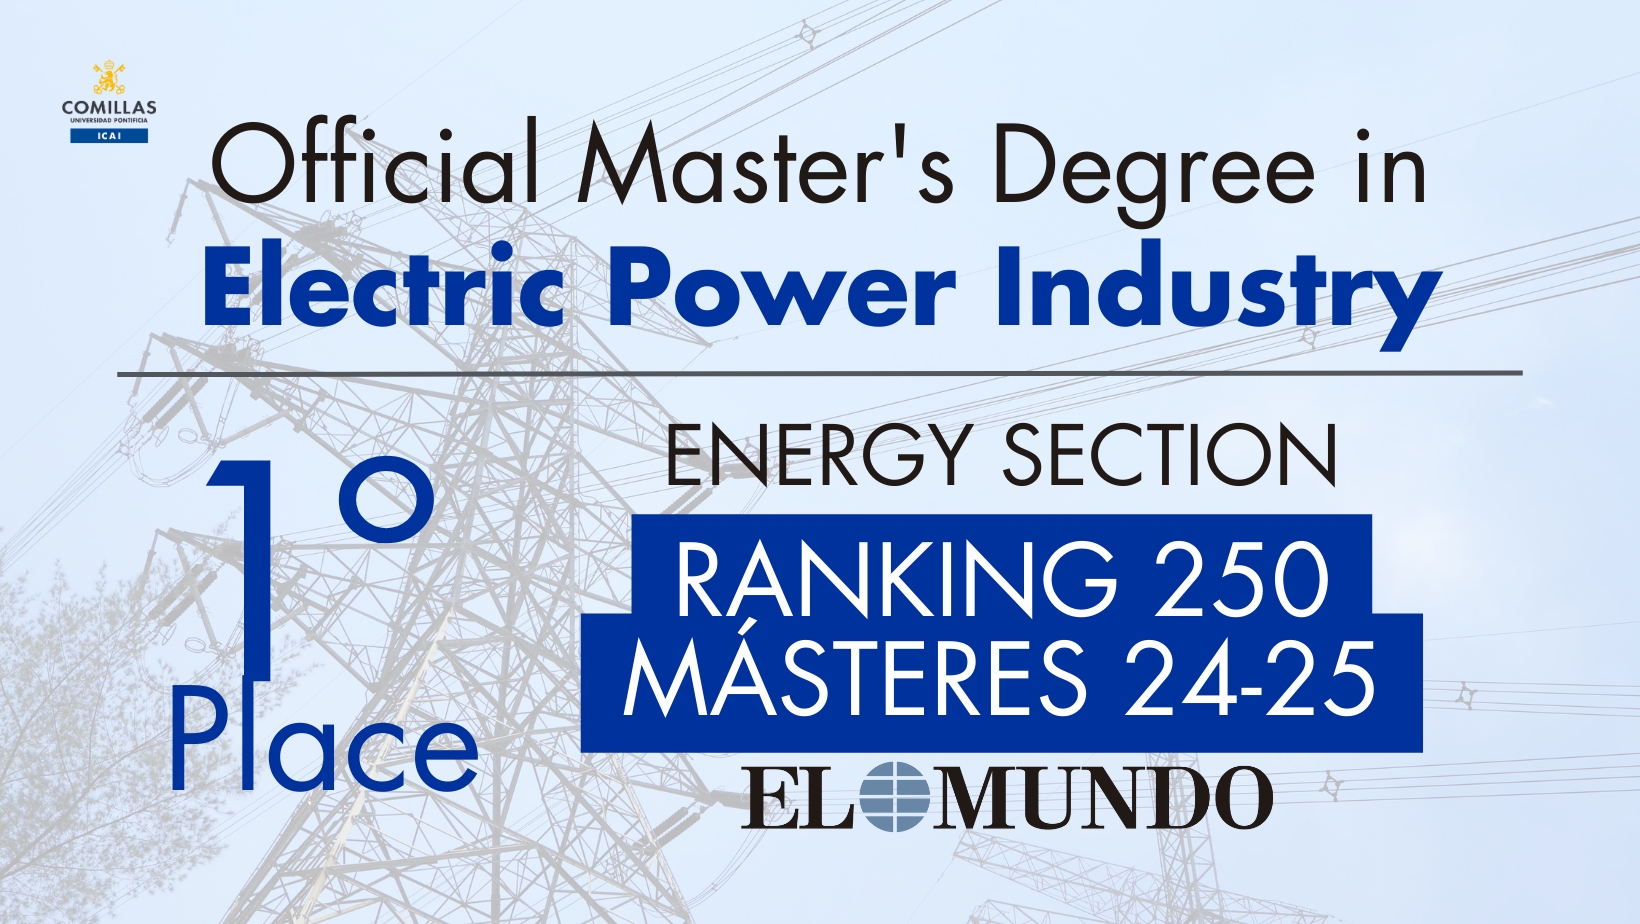 Advertisement for the Official Master's Degree in Electric Power Industry at Comillas, ranked 1st place in the energy section of the EL MUNDO's 2024-25 Masters ranking.